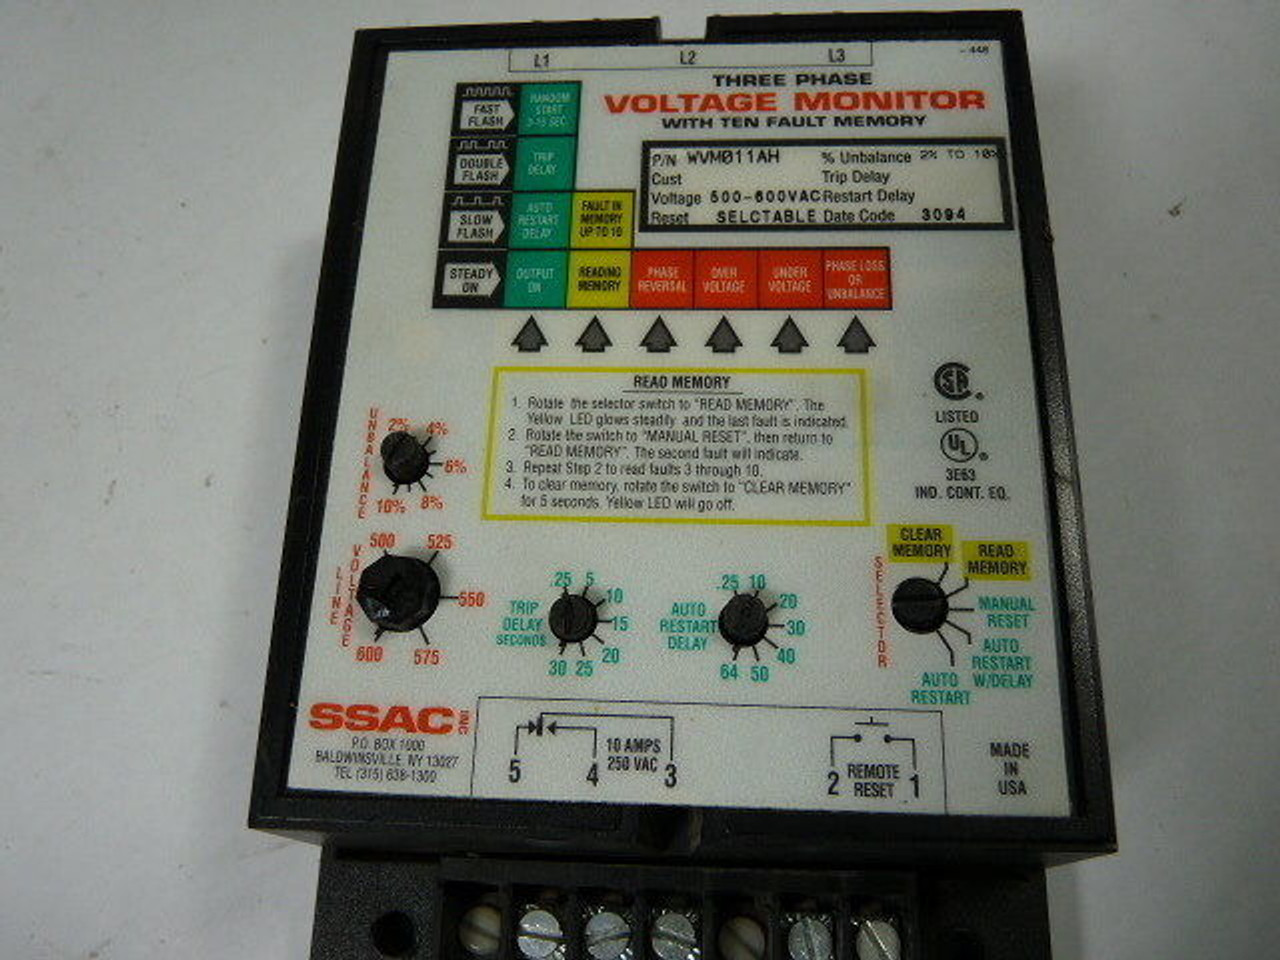 SSAC WVM011AH 3-Phase Voltage Monitor 500-600V USED